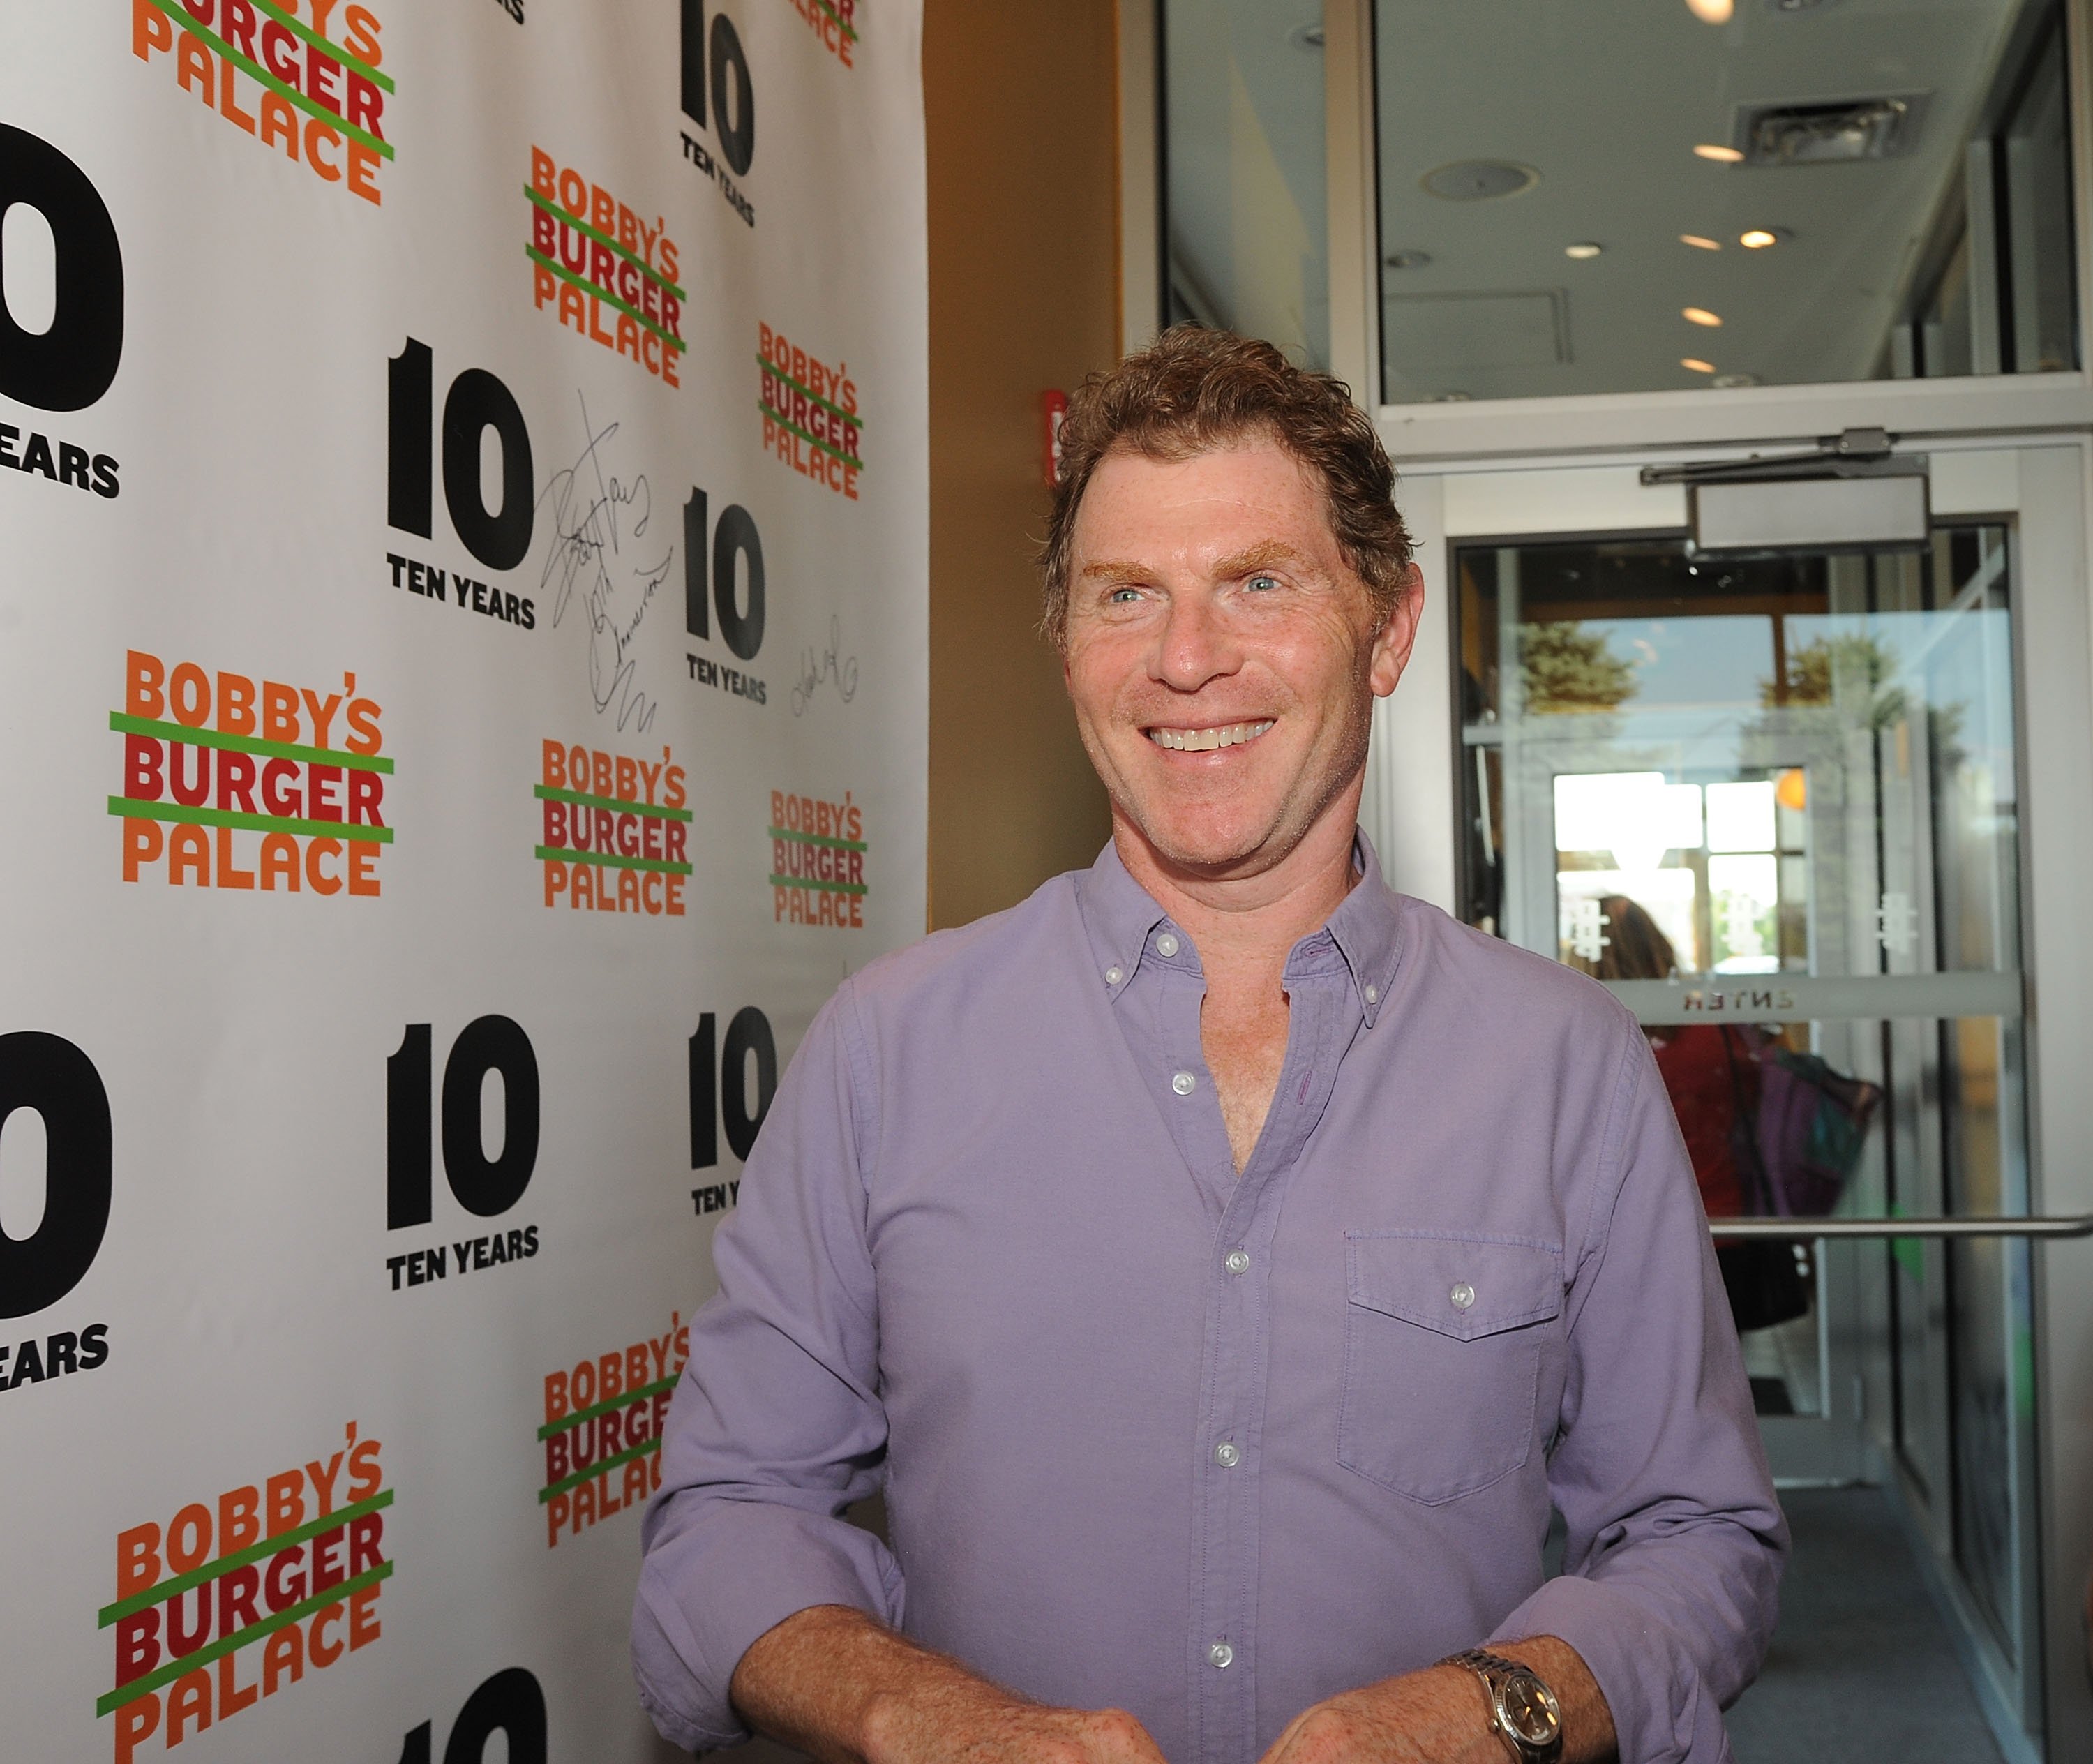 Food Network chef Bobby Flay is wearing a long-sleeve button-down shirt as he visits a Bobby's Burger Palace restaurant in 2018.